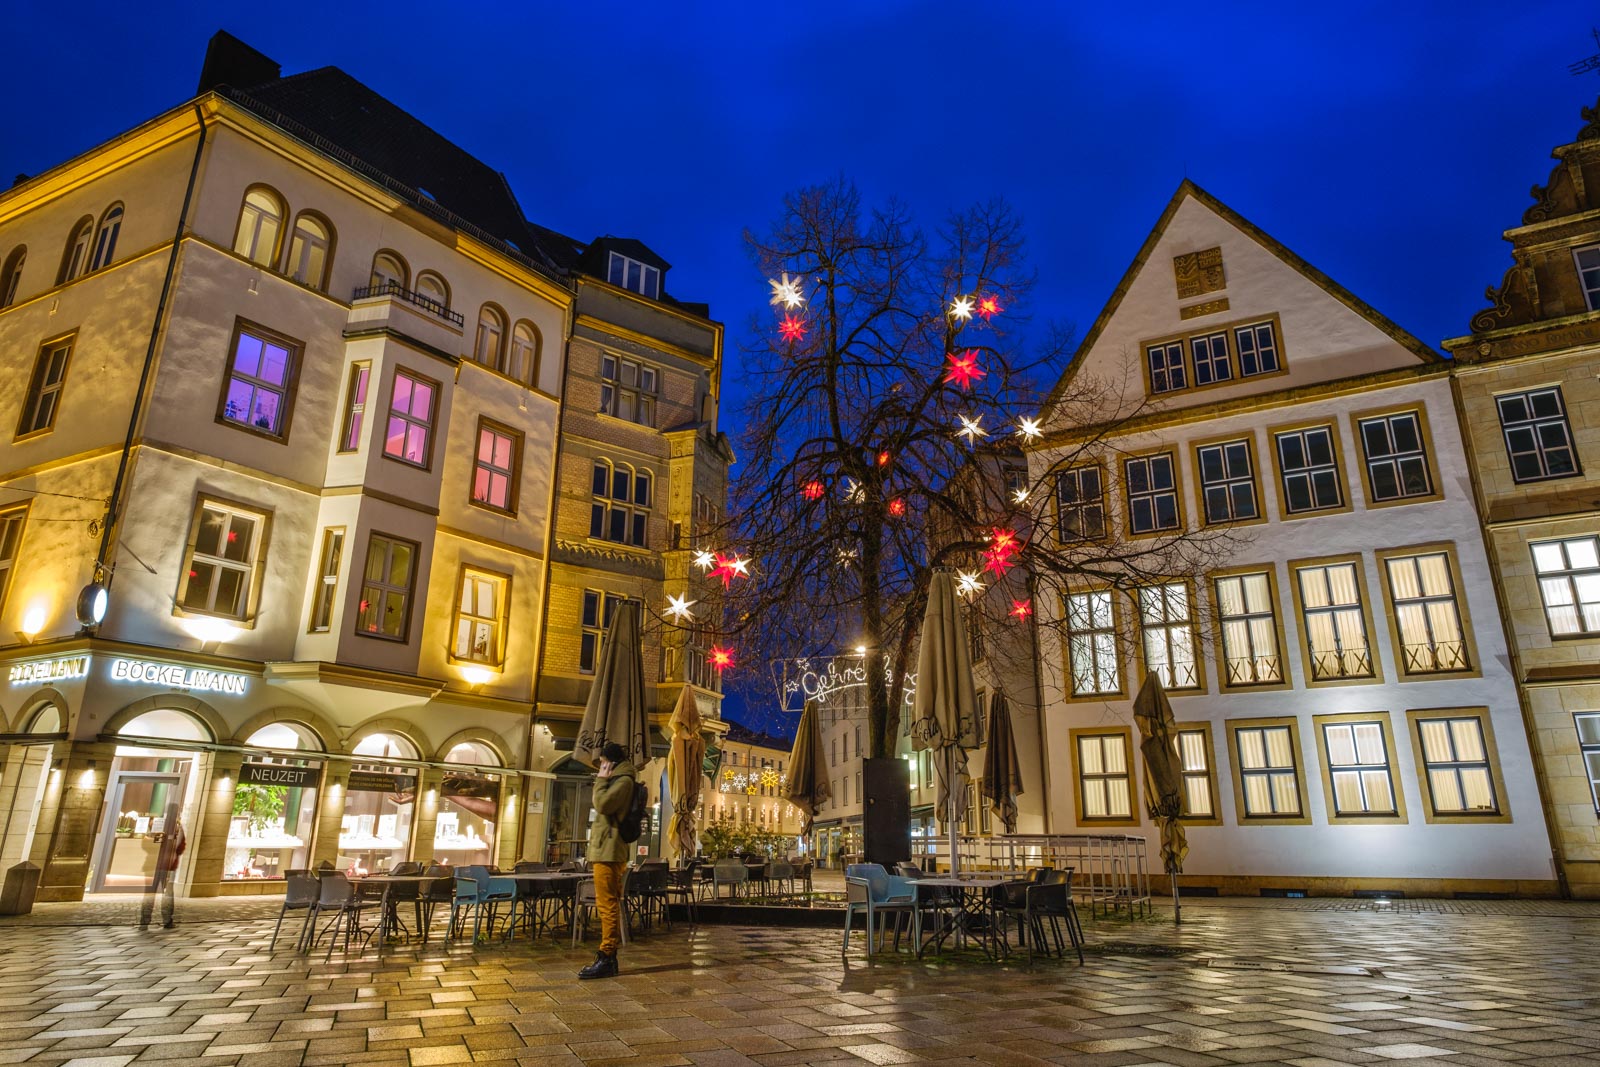 Christmas season at the 'Alter Markt' in the old town of Bielefeld in December 2020 (Germany).